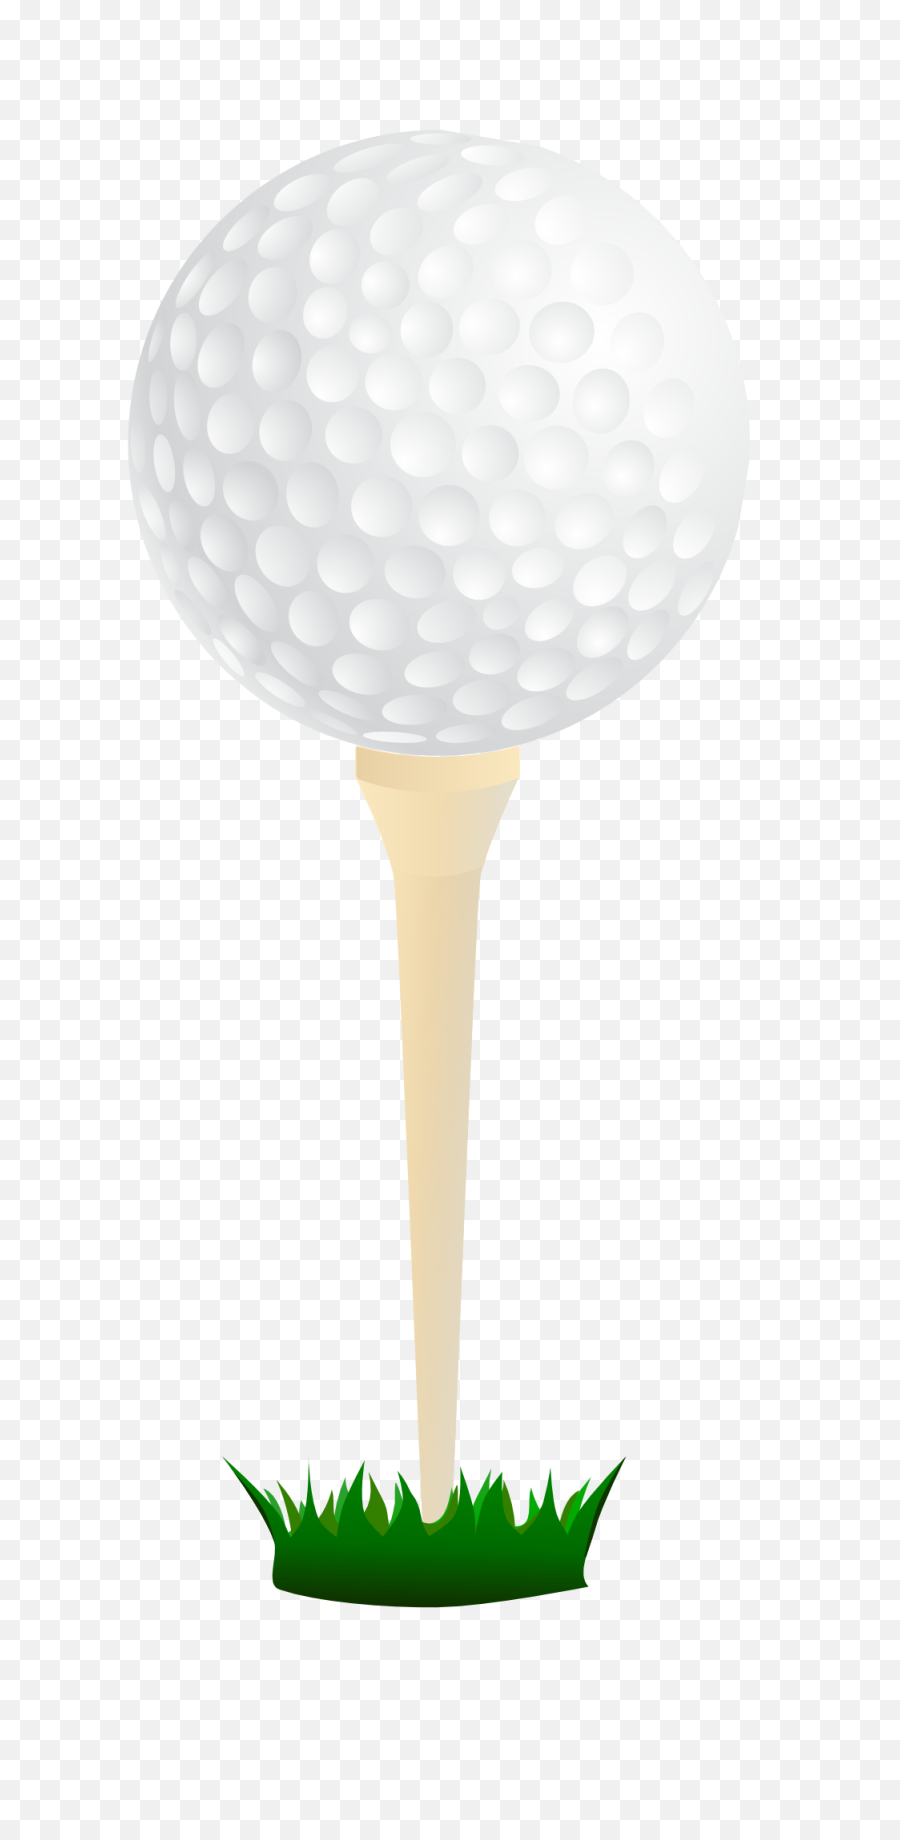 Gold Ball Transparent Png Clipart - Golf Ball And Tee,Gold Ball Png